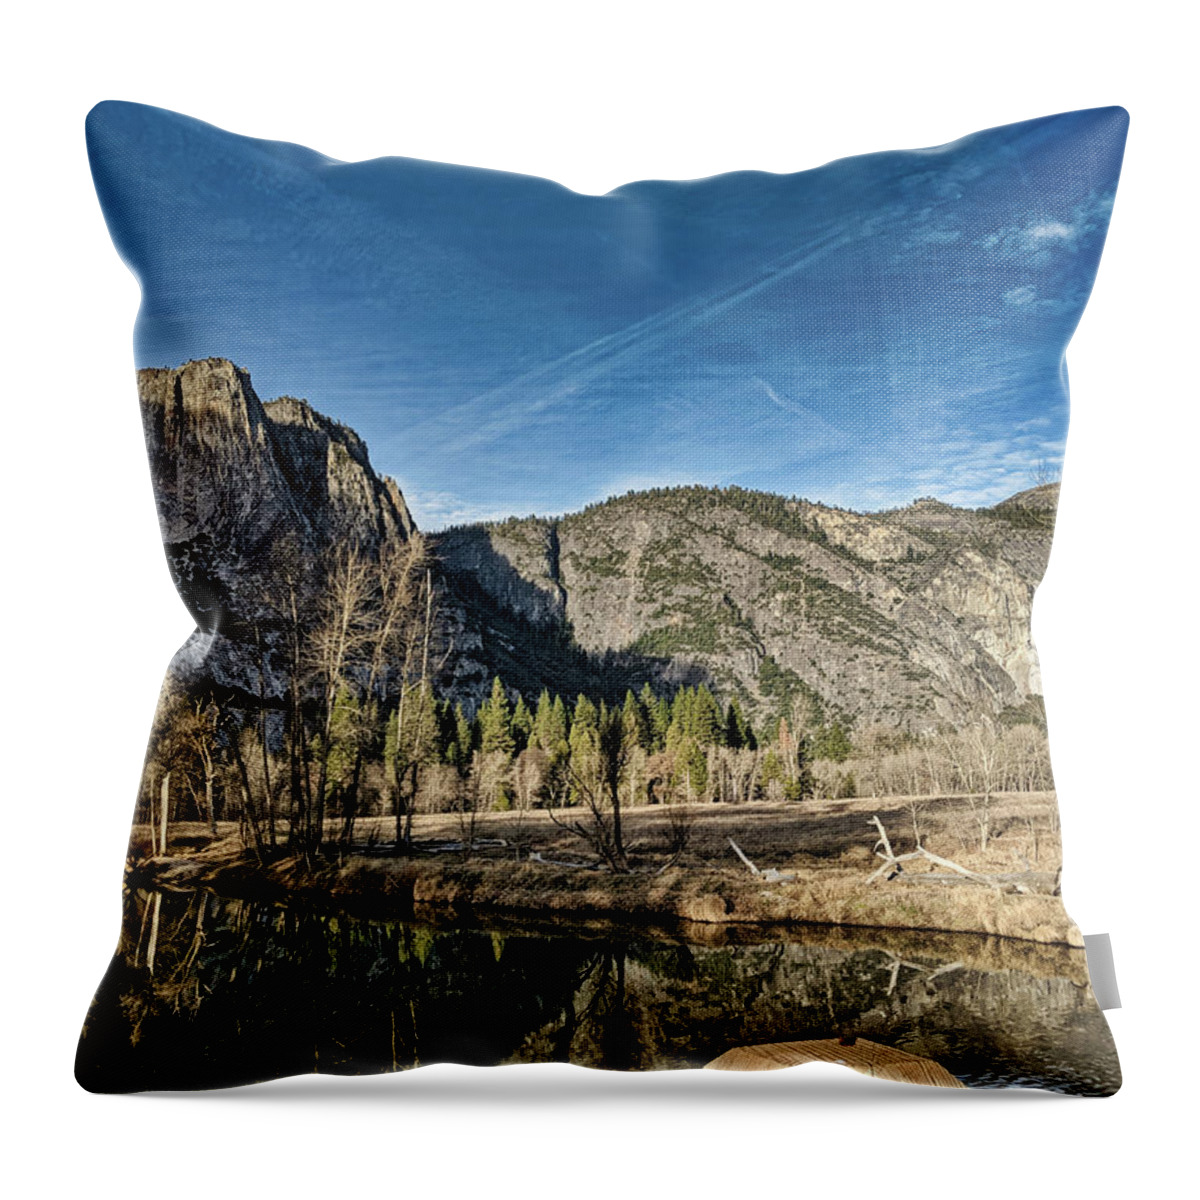 Water Throw Pillow featuring the photograph Yosemite Reflection by Portia Olaughlin